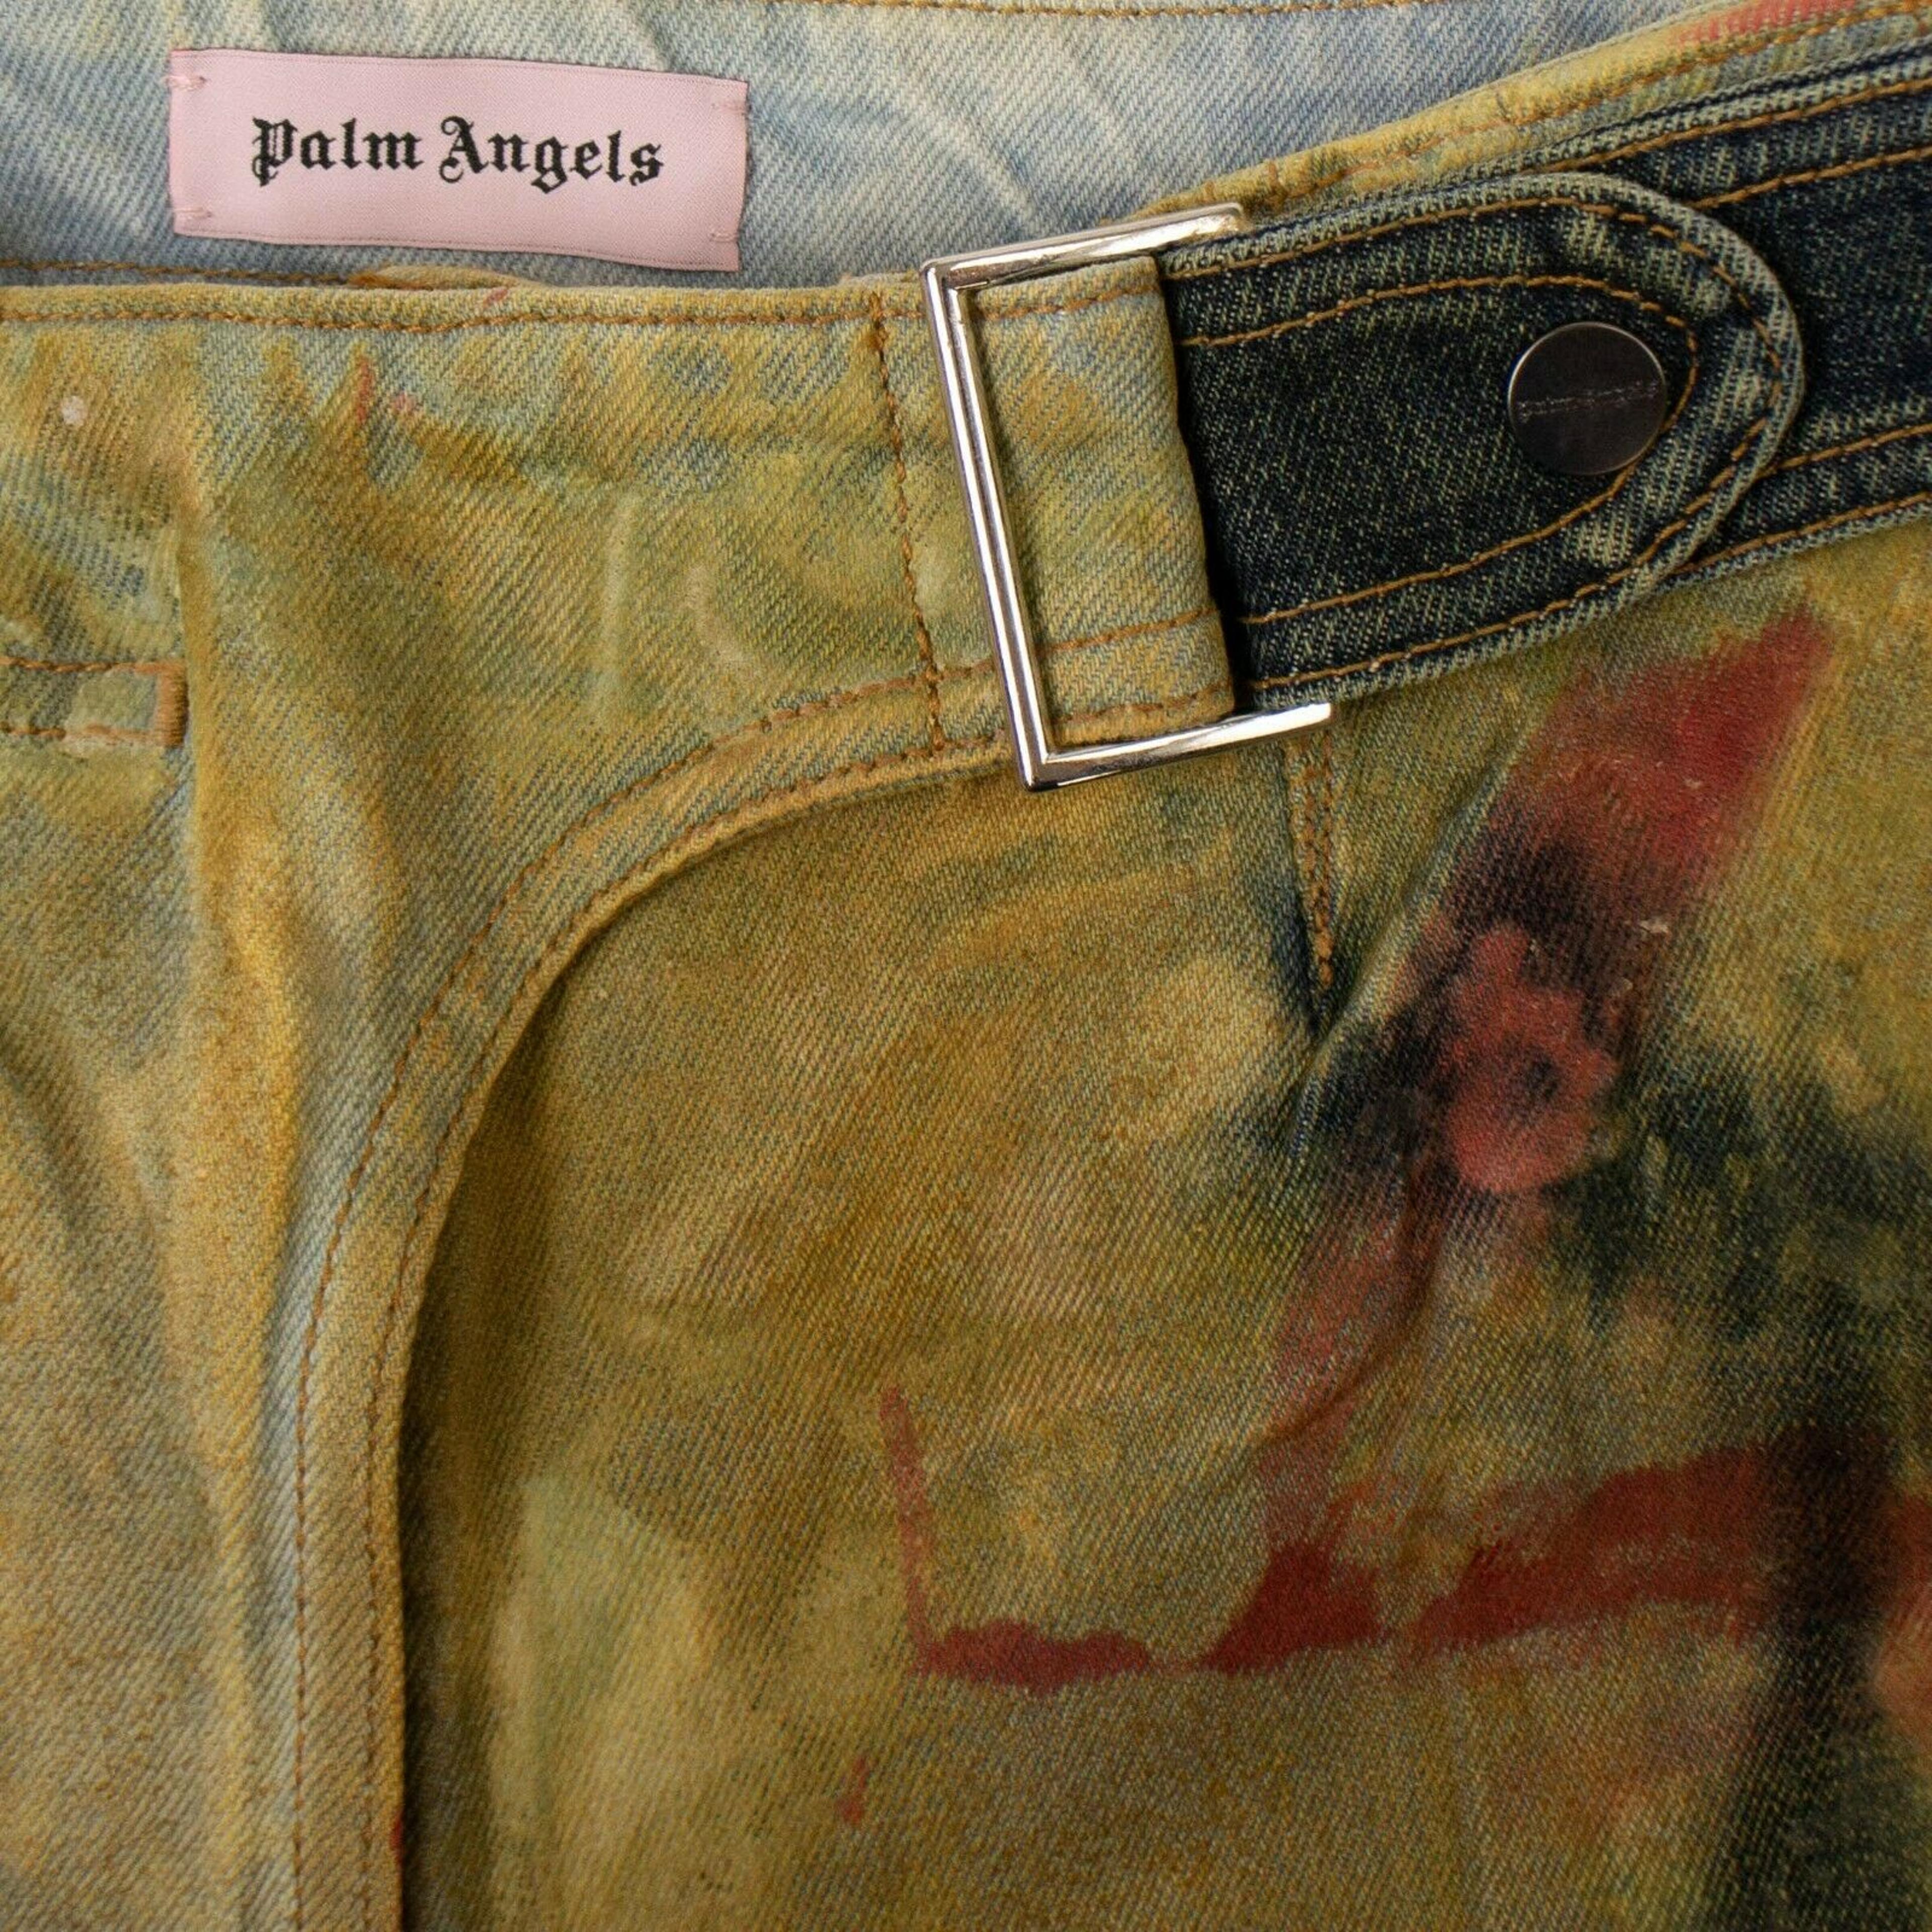 Alternate View 4 of Palm Angels Tie Dye Jeans Pants - Yellow